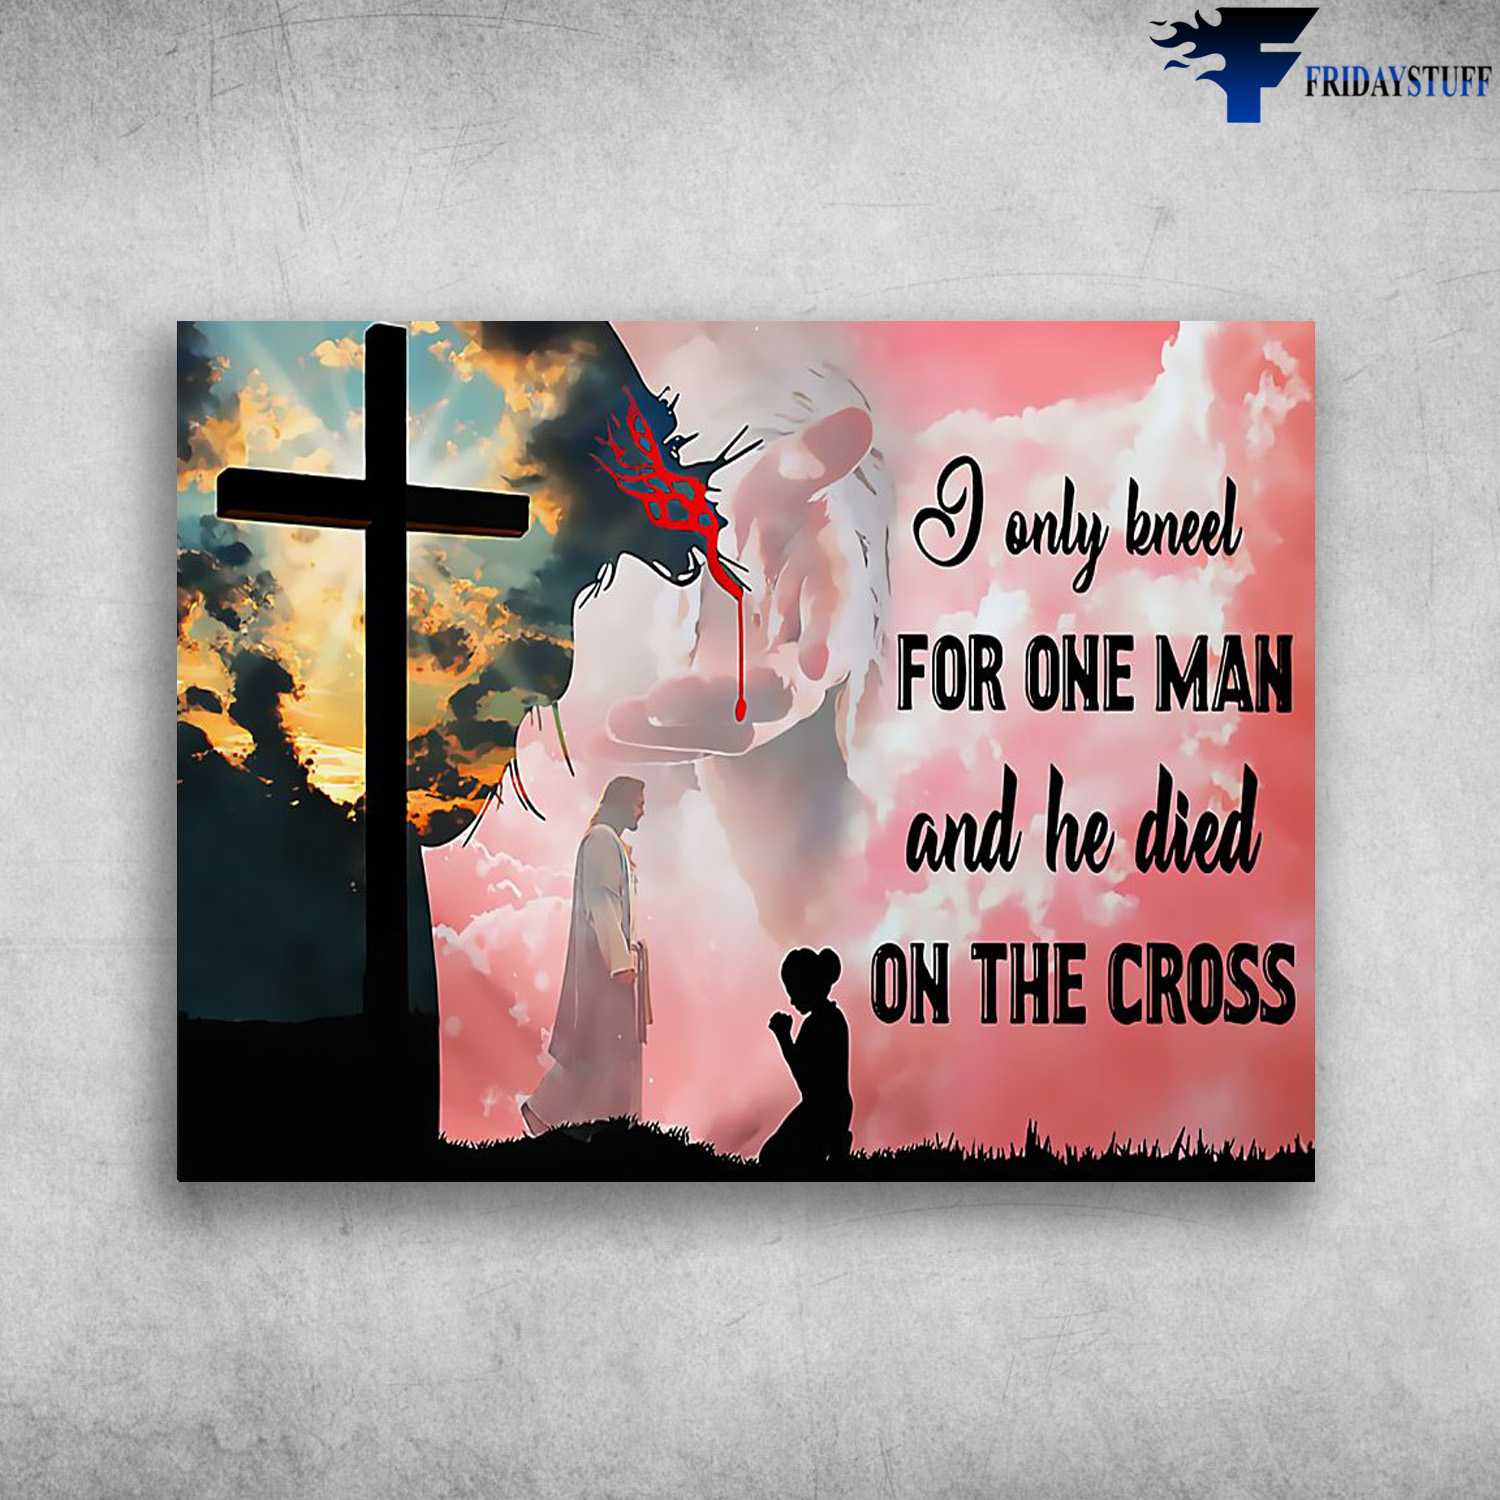 God Lover, Believe In God, I Only Kneel For A Man, And He Died On The Cross